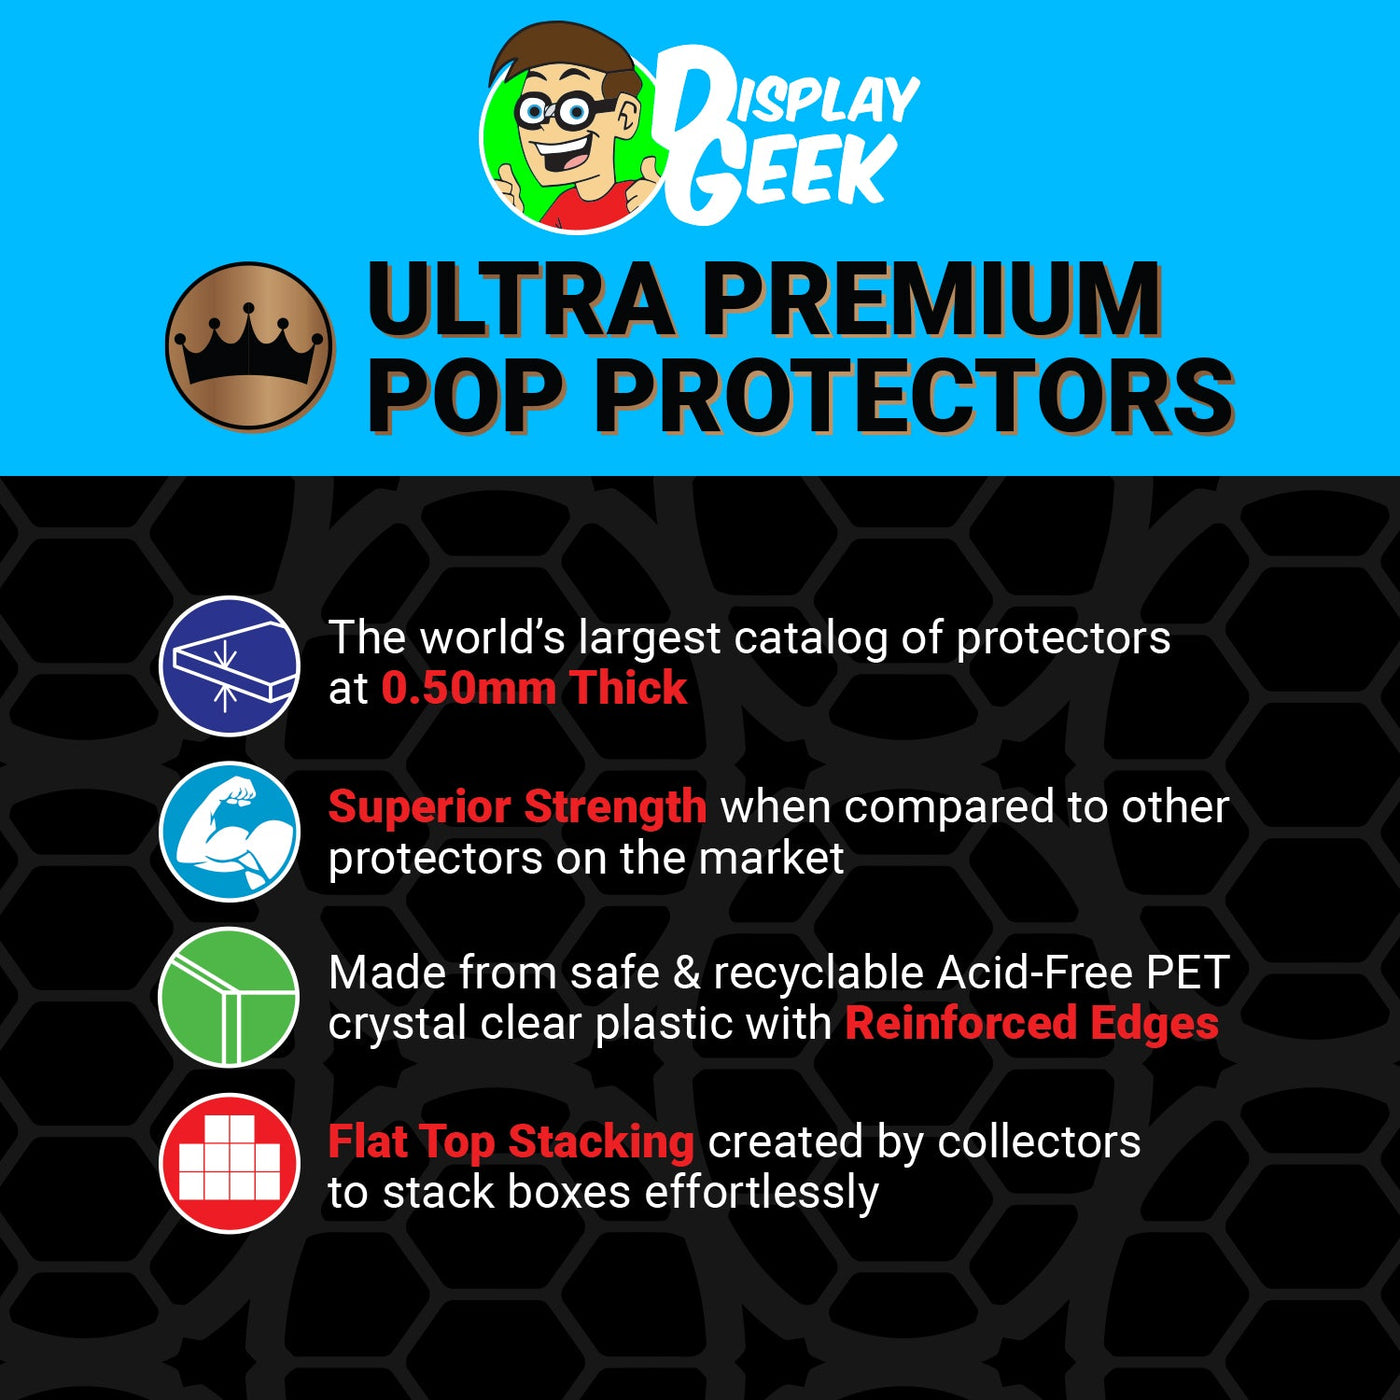 Pop Protector for Freddy Funko as Thor SDCC LE 144 on The Protector Guide App by Display Geek